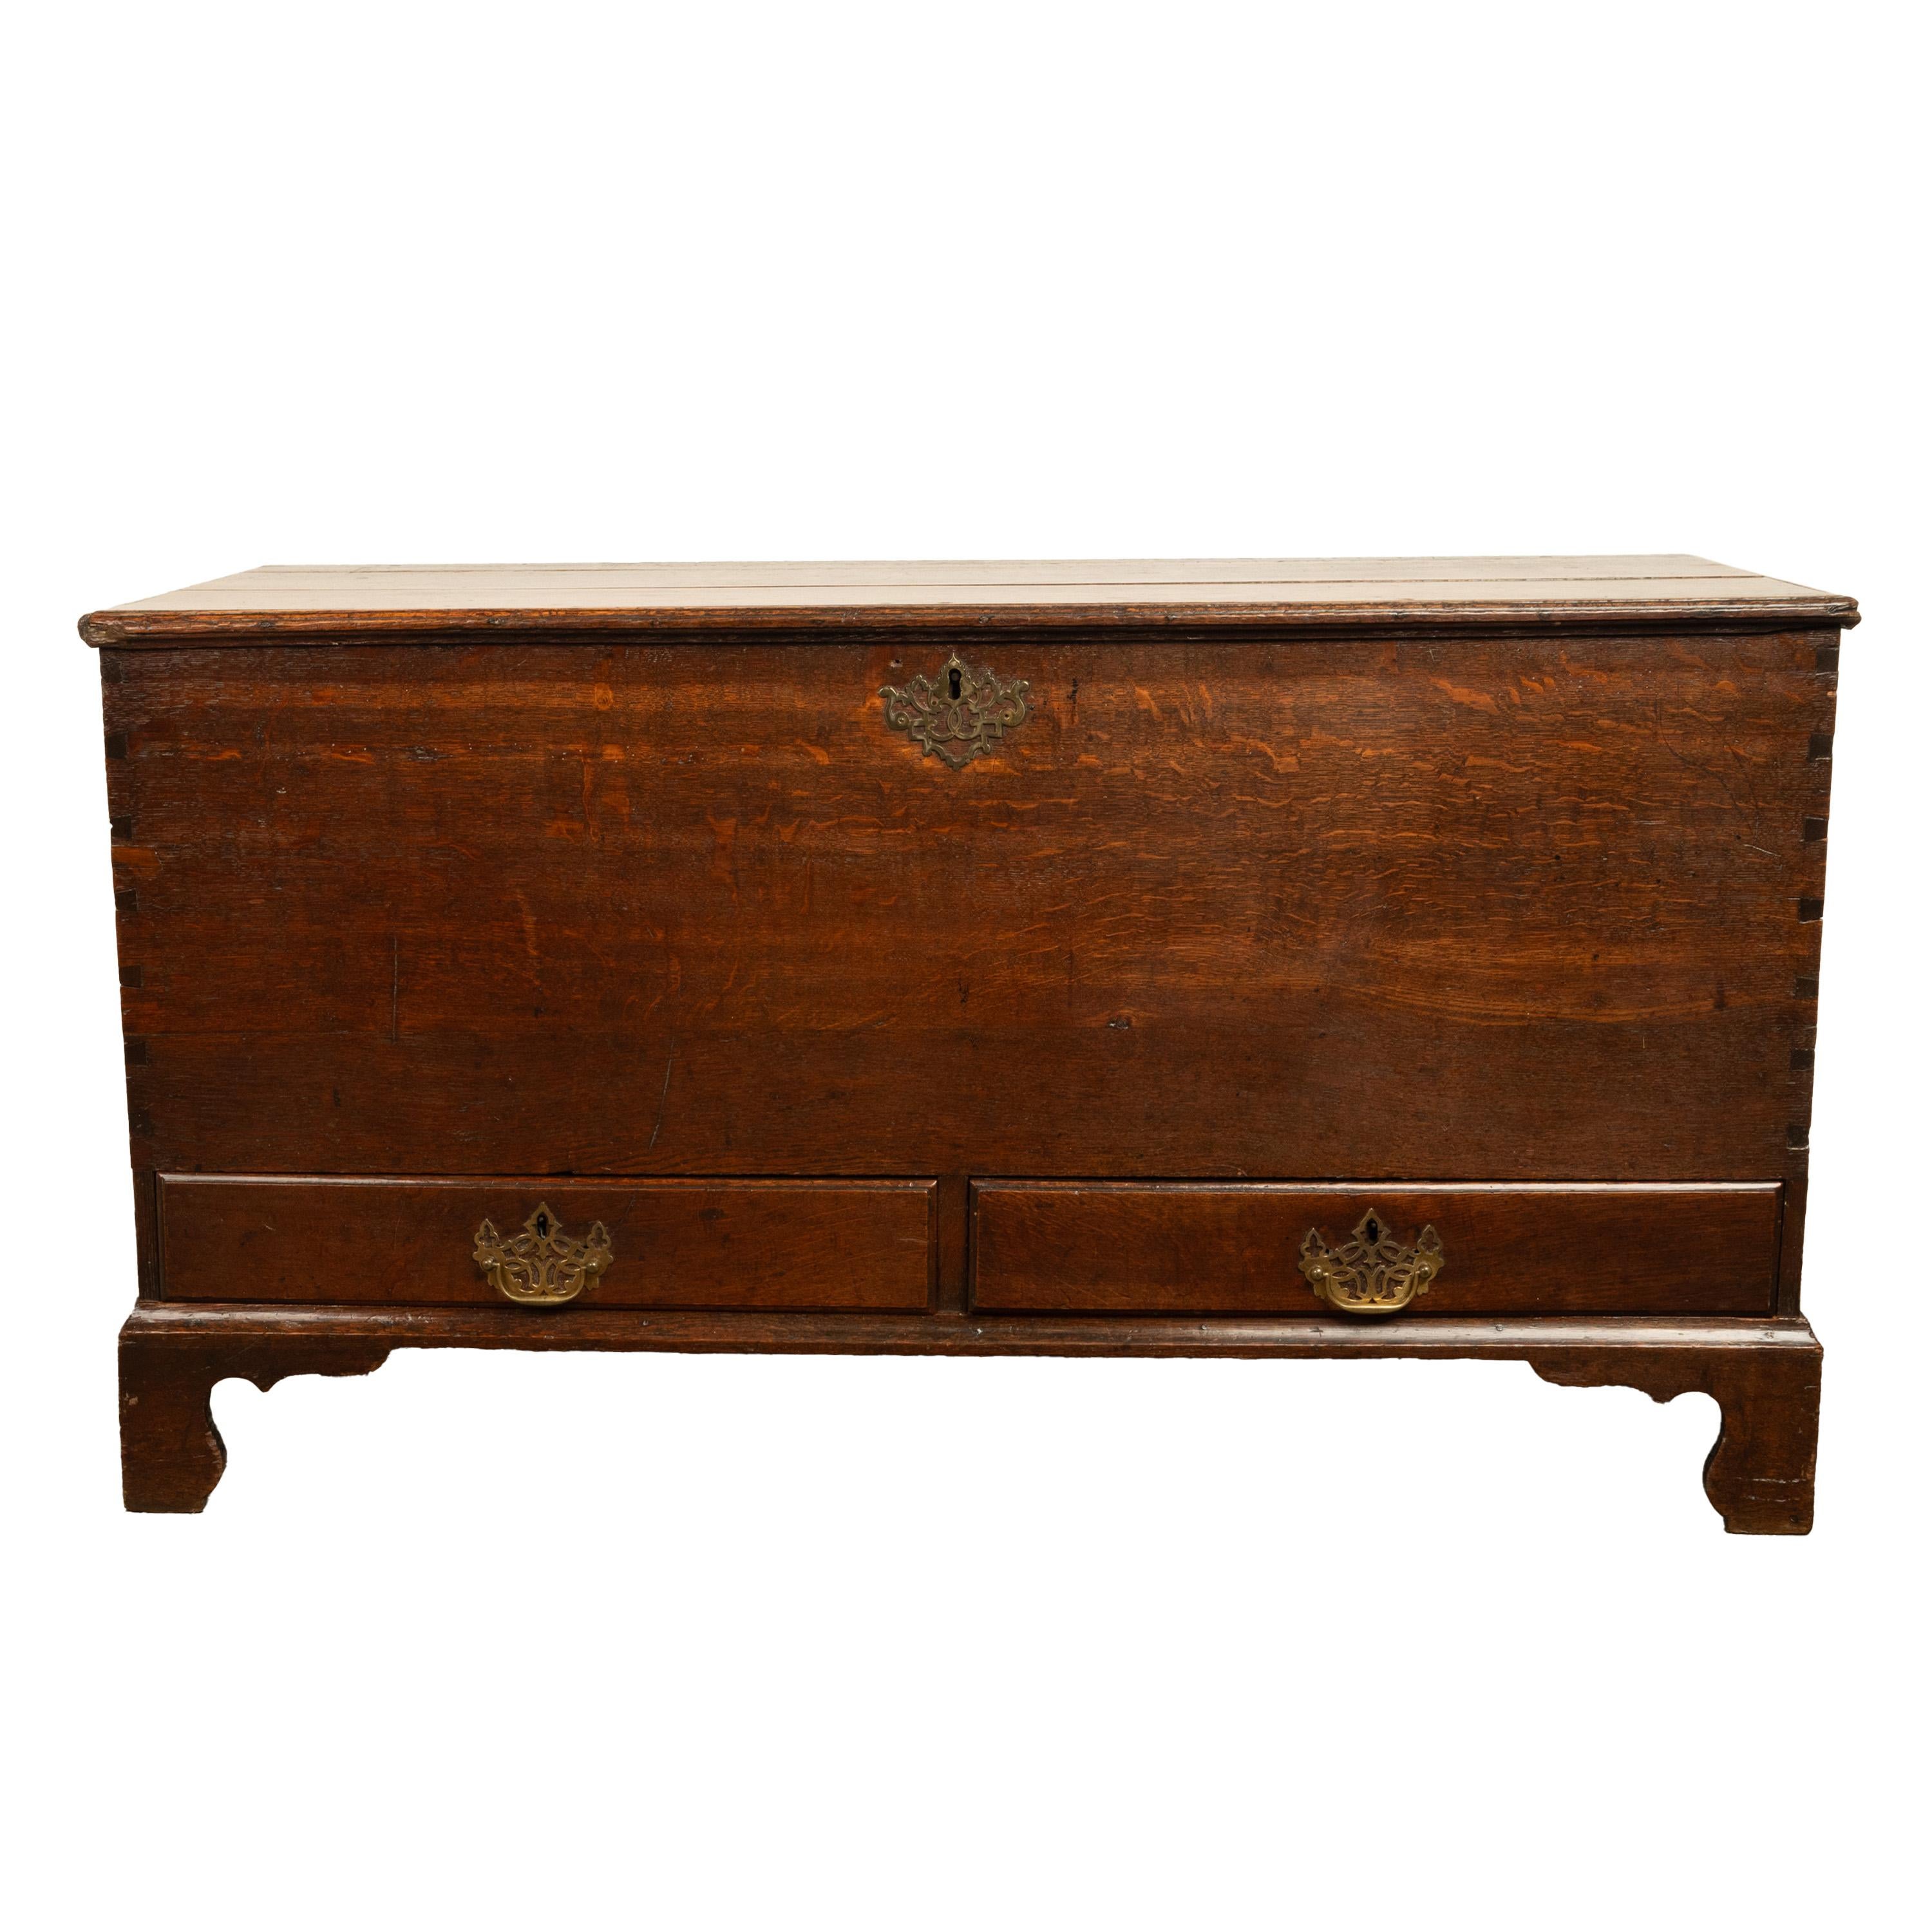 A good George III country oak mule chest, coffer, circa 1760.
The lift up oak lid having the original hand-forged strap hinges and encloses a large storage area for bedding, clothes or? The chest with the original pierced brass lock plate, a key is